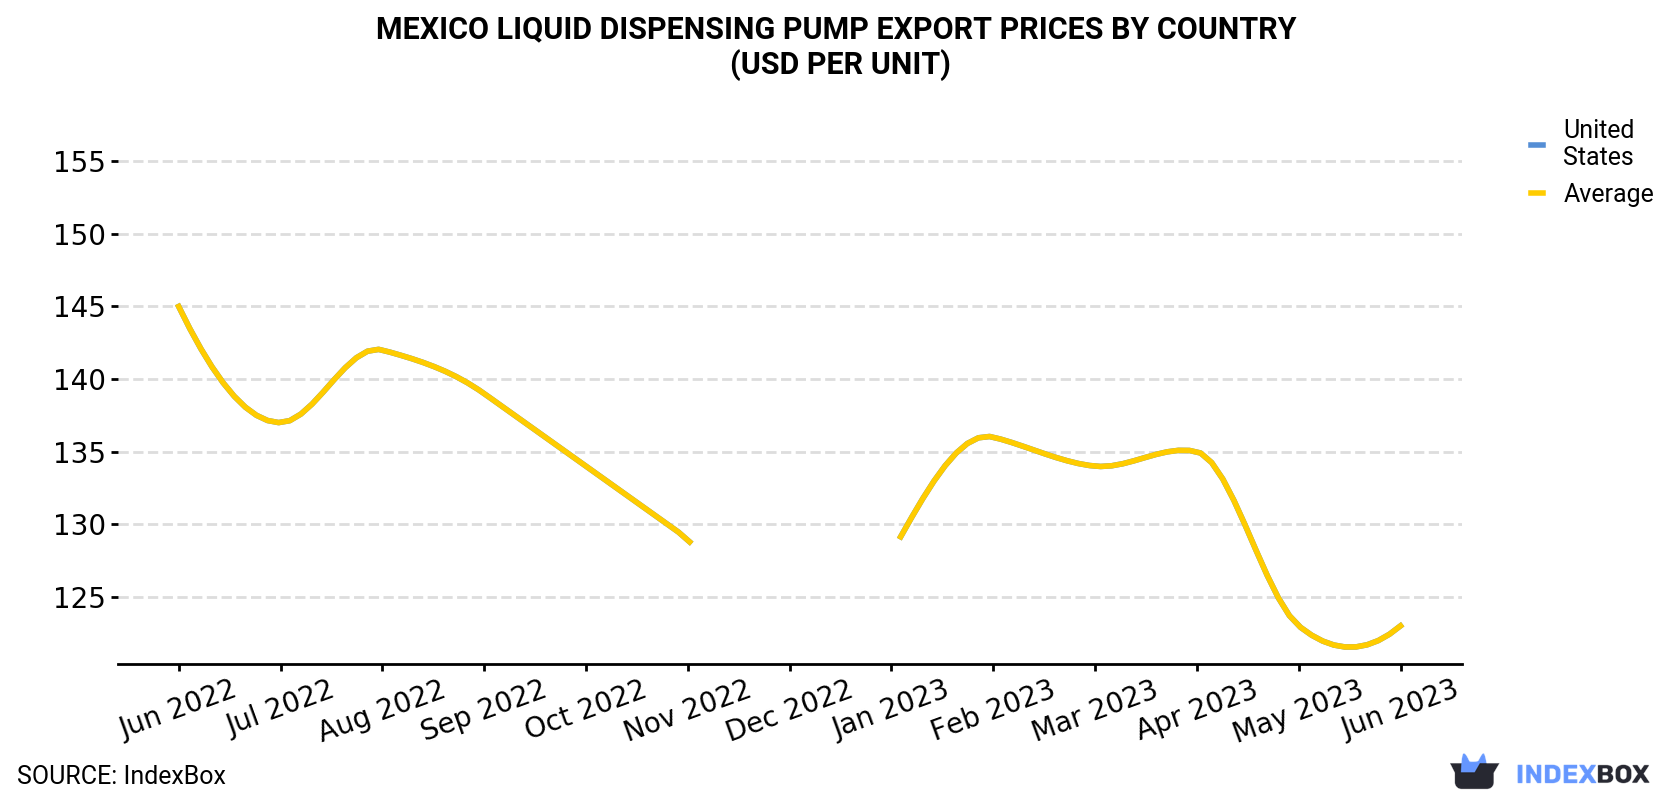 Mexico Liquid Dispensing Pump Export Prices By Country (USD Per Unit)